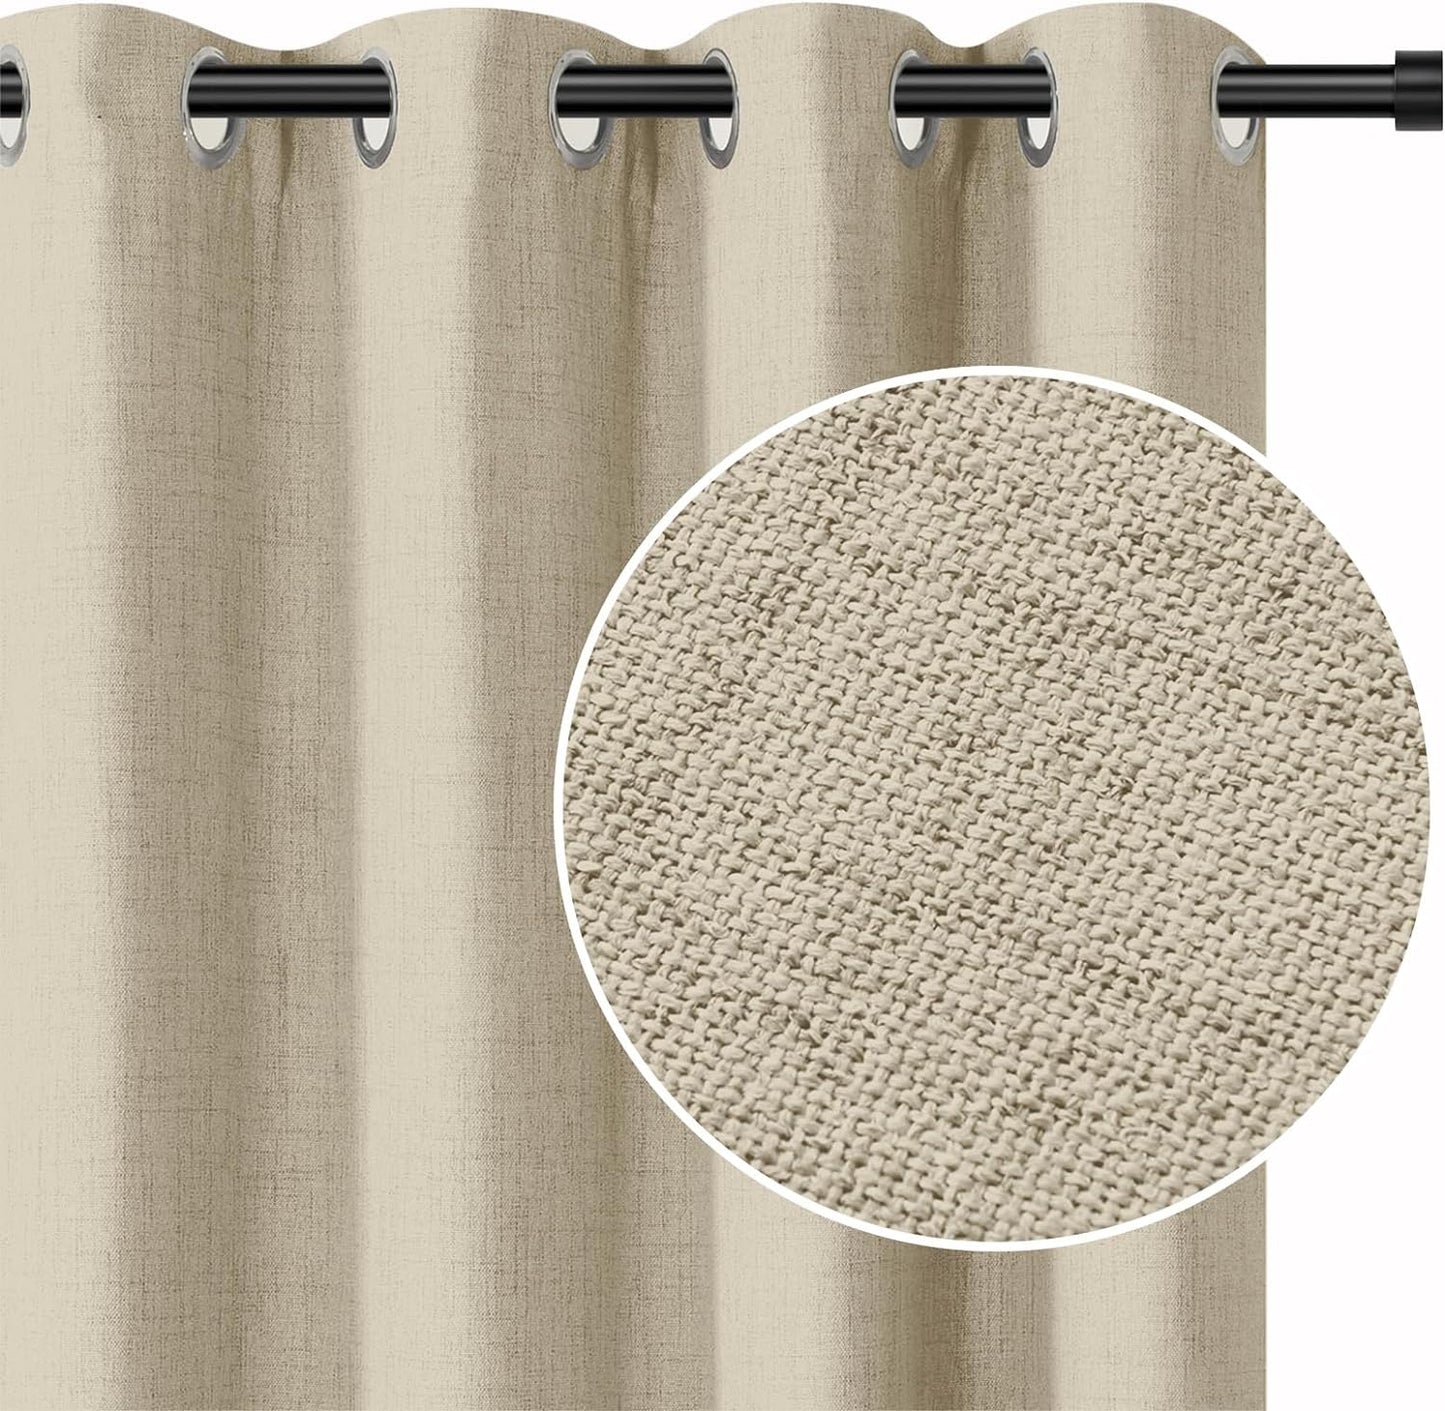 INOVADAY Blackout Curtains 63 Inch Length 2 Panels Set, Thermal Insulated Linen Blackout Curtains & Drapes Grommet Room Darkening Curtains for Bedroom Living Room- Dark Grey, W50 X L63  INOVADAY Natural Flax 50"W X 96"L 